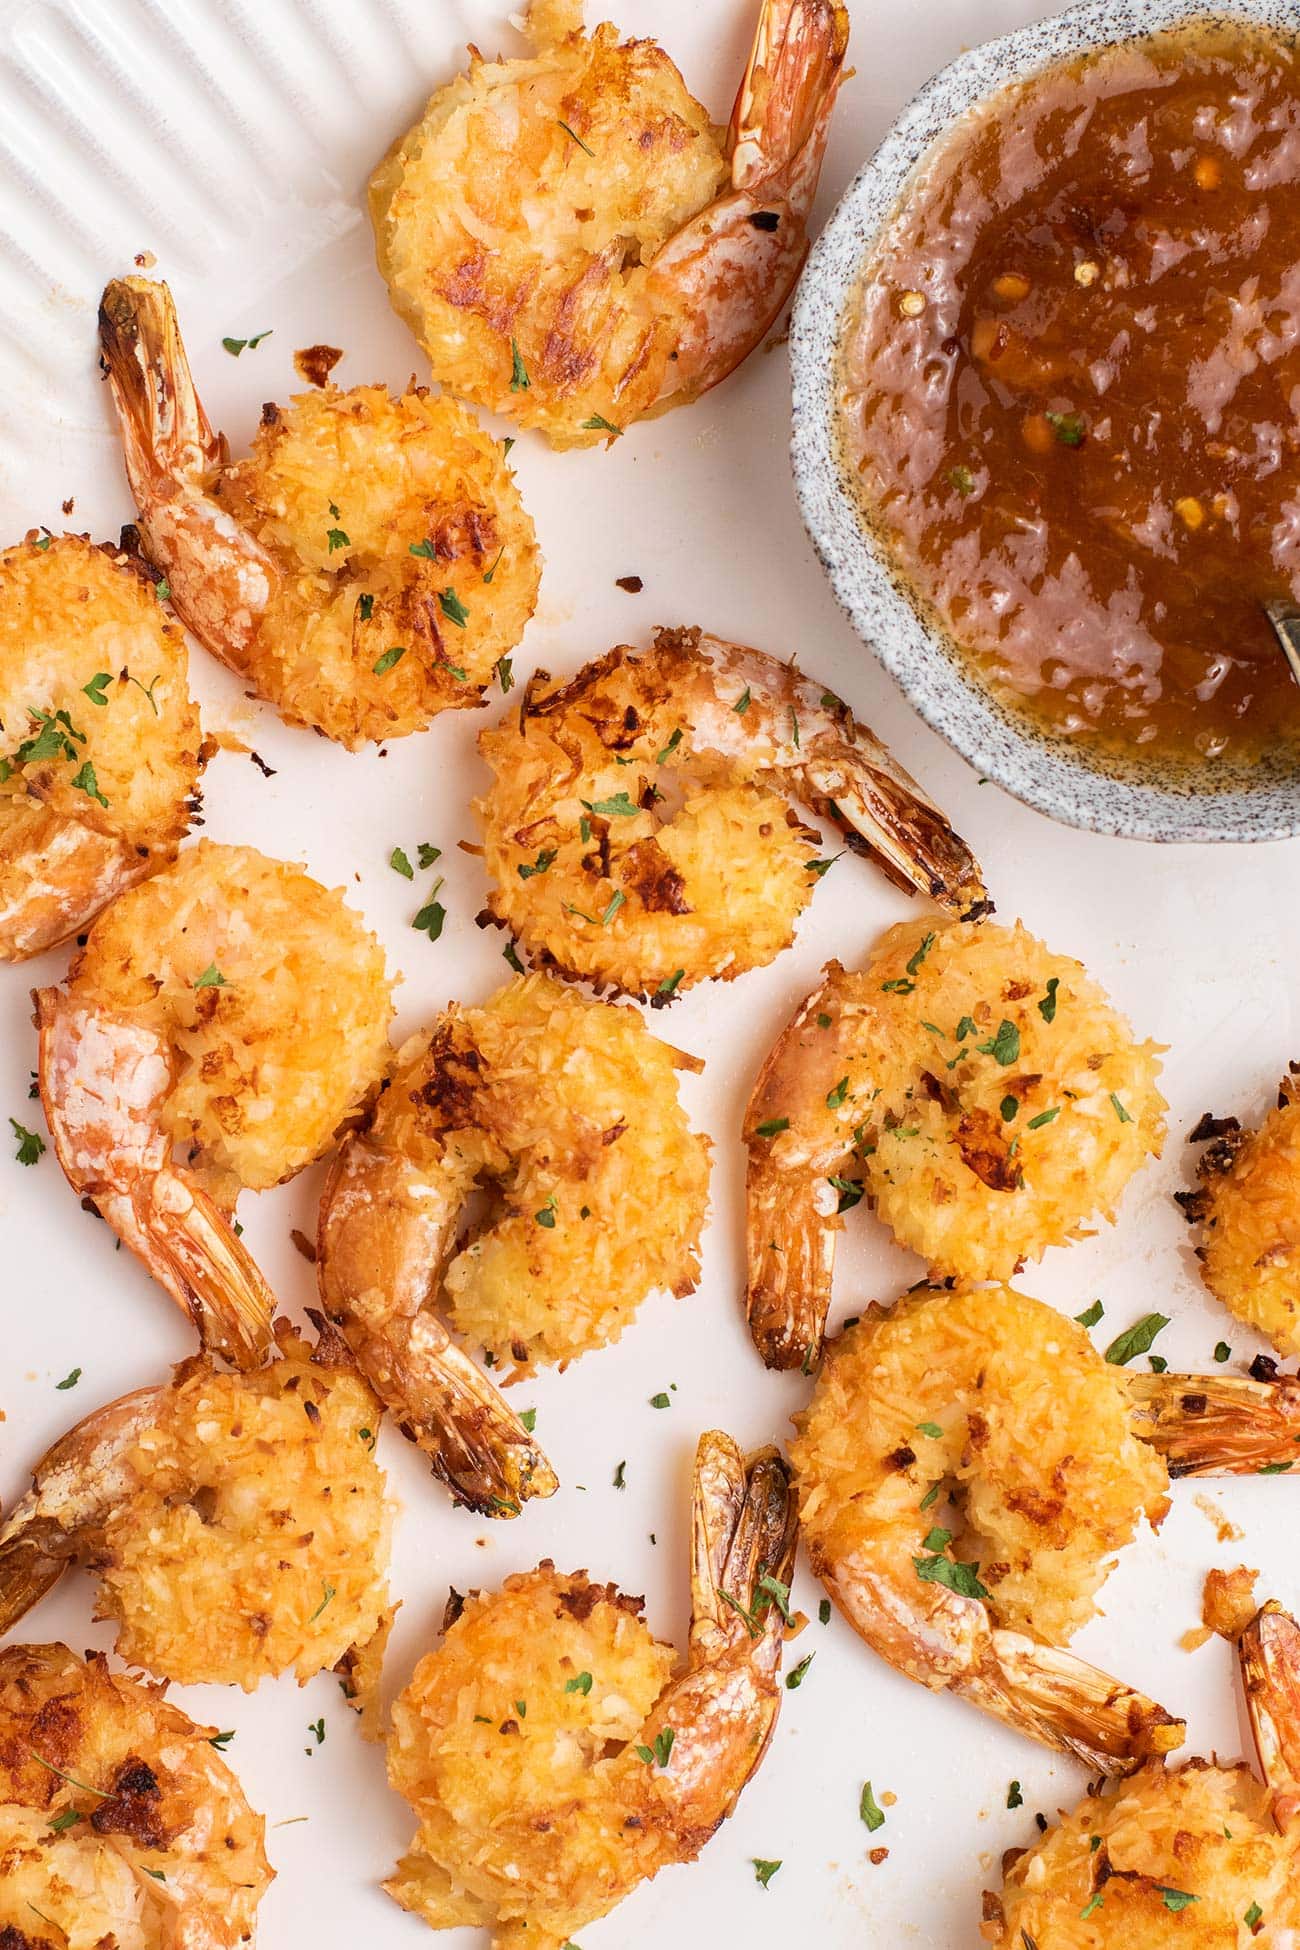 A platter of crispy baked coconut shrimp shown with an apricot dipping sauce.